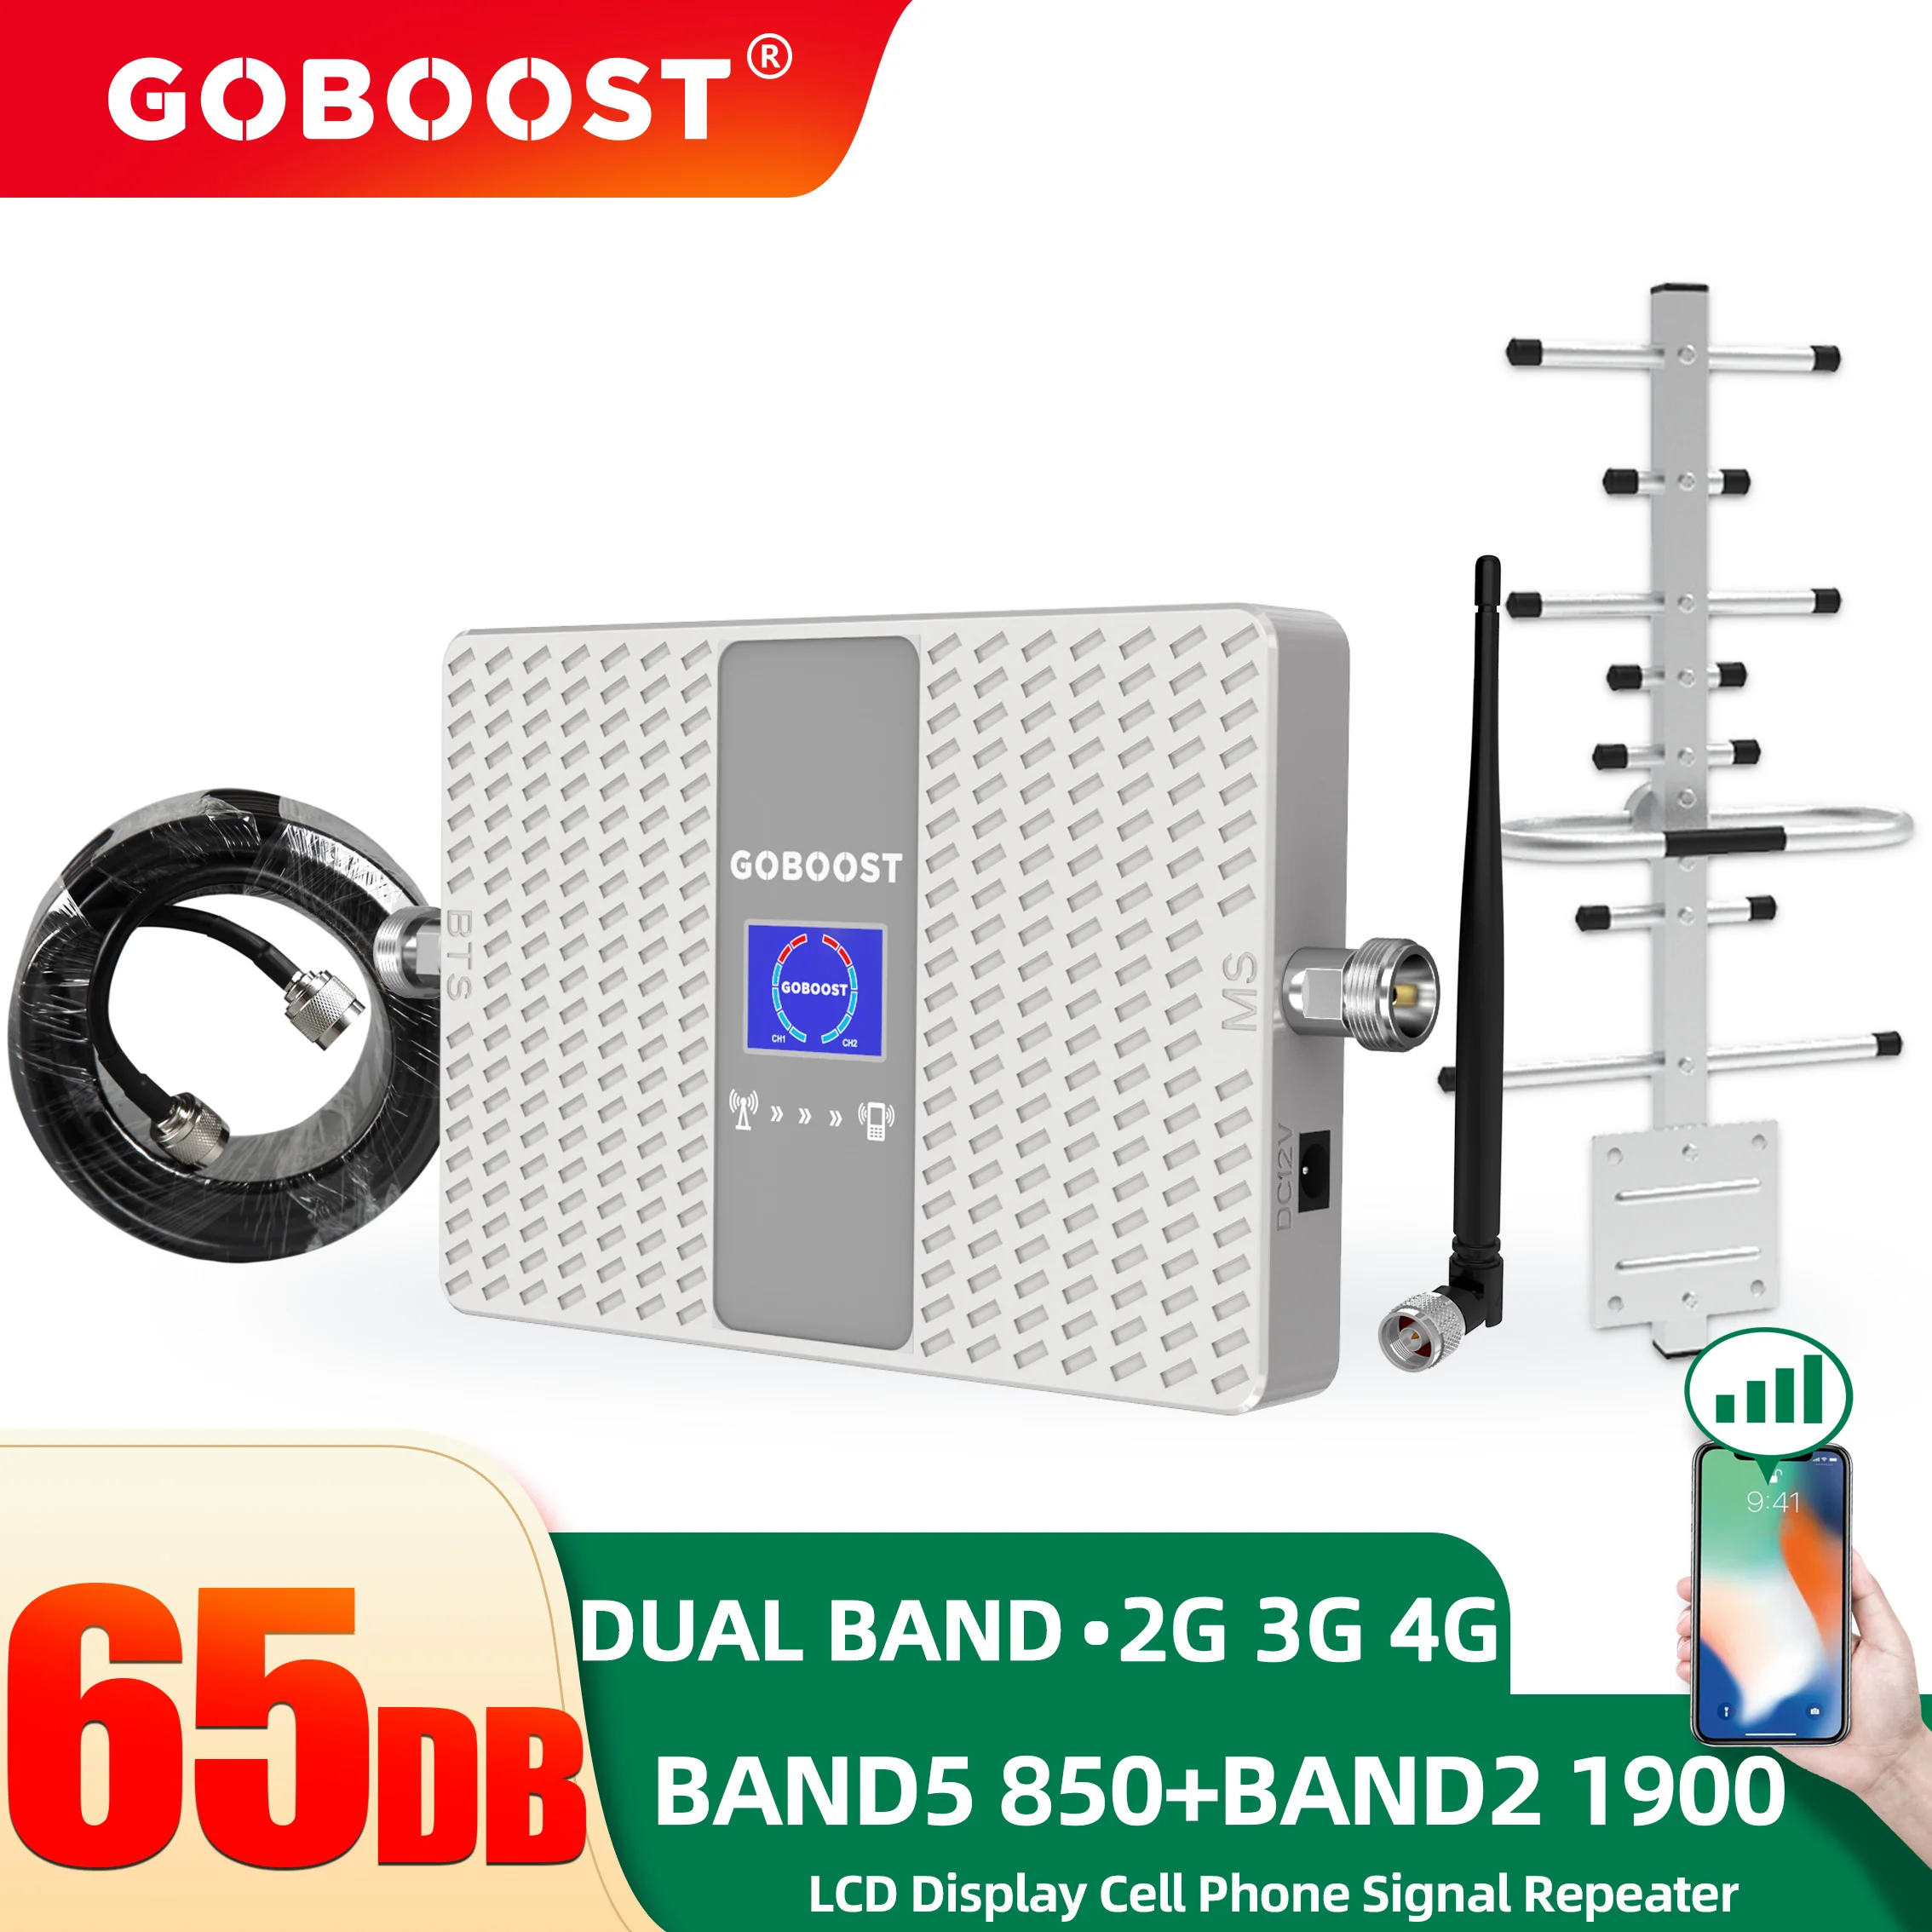 GOBOOST 3g 4g Dual Band Signal Booster 850 1900 Mhz CDMA PCS Celluar Amplifier Display Cell Phone Network Antenna Repeater A Set